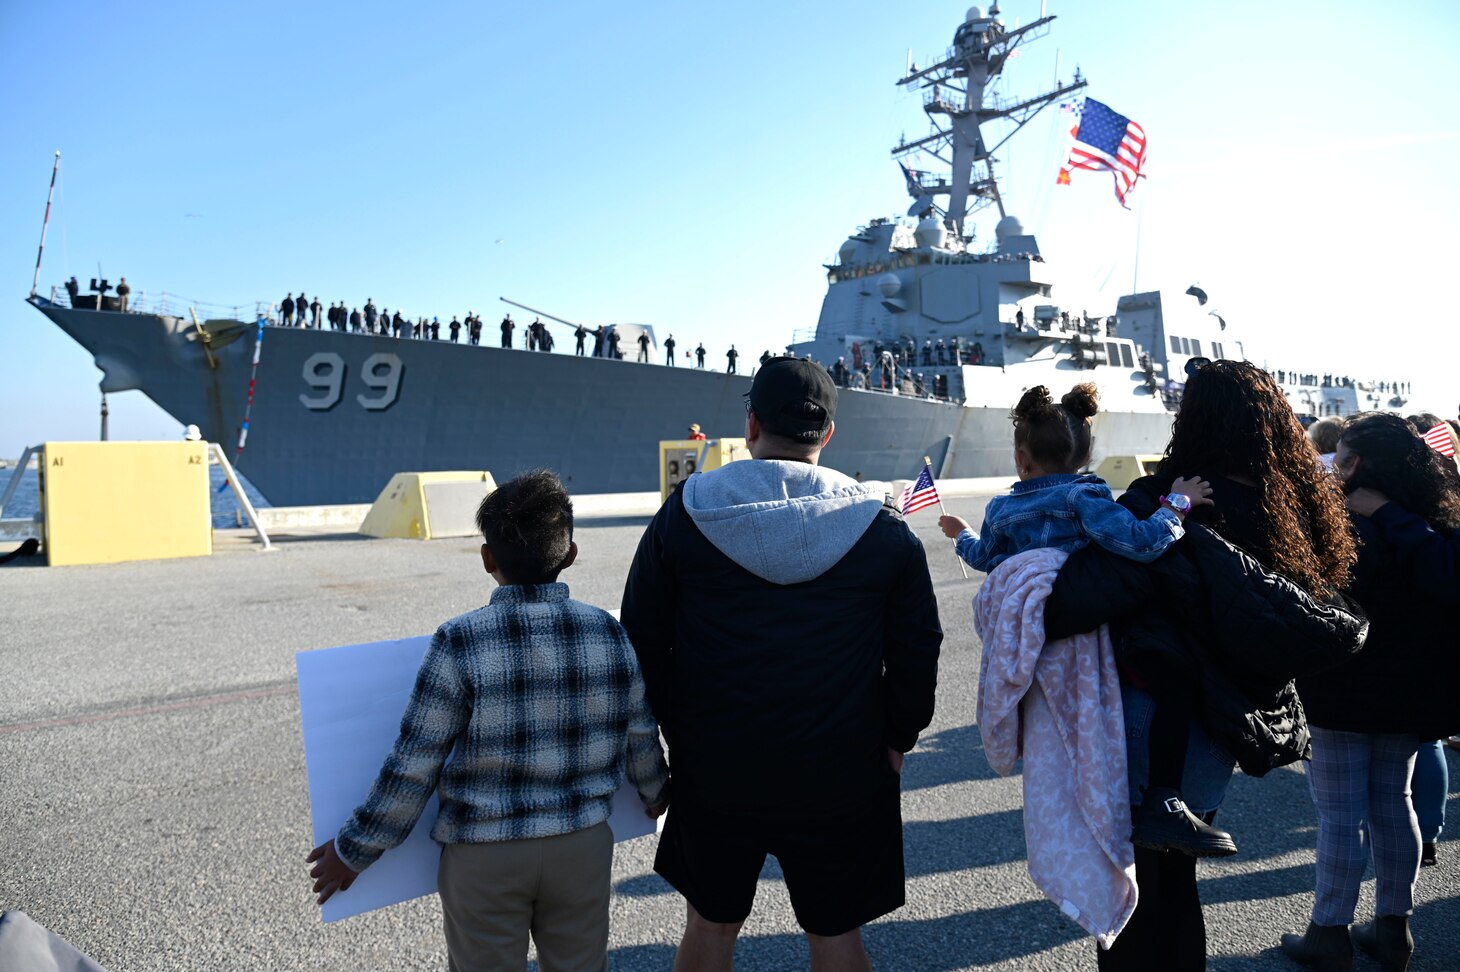 USS Farragut (DDG 99) moors at U.S. Naval Station Mayport, Fla., following a deployment to the U.S. Southern Command area of responsibility supporting Joint Interagency Task Force (JIATF)-South’s counter-narcotics operations in the Caribbean Sea.